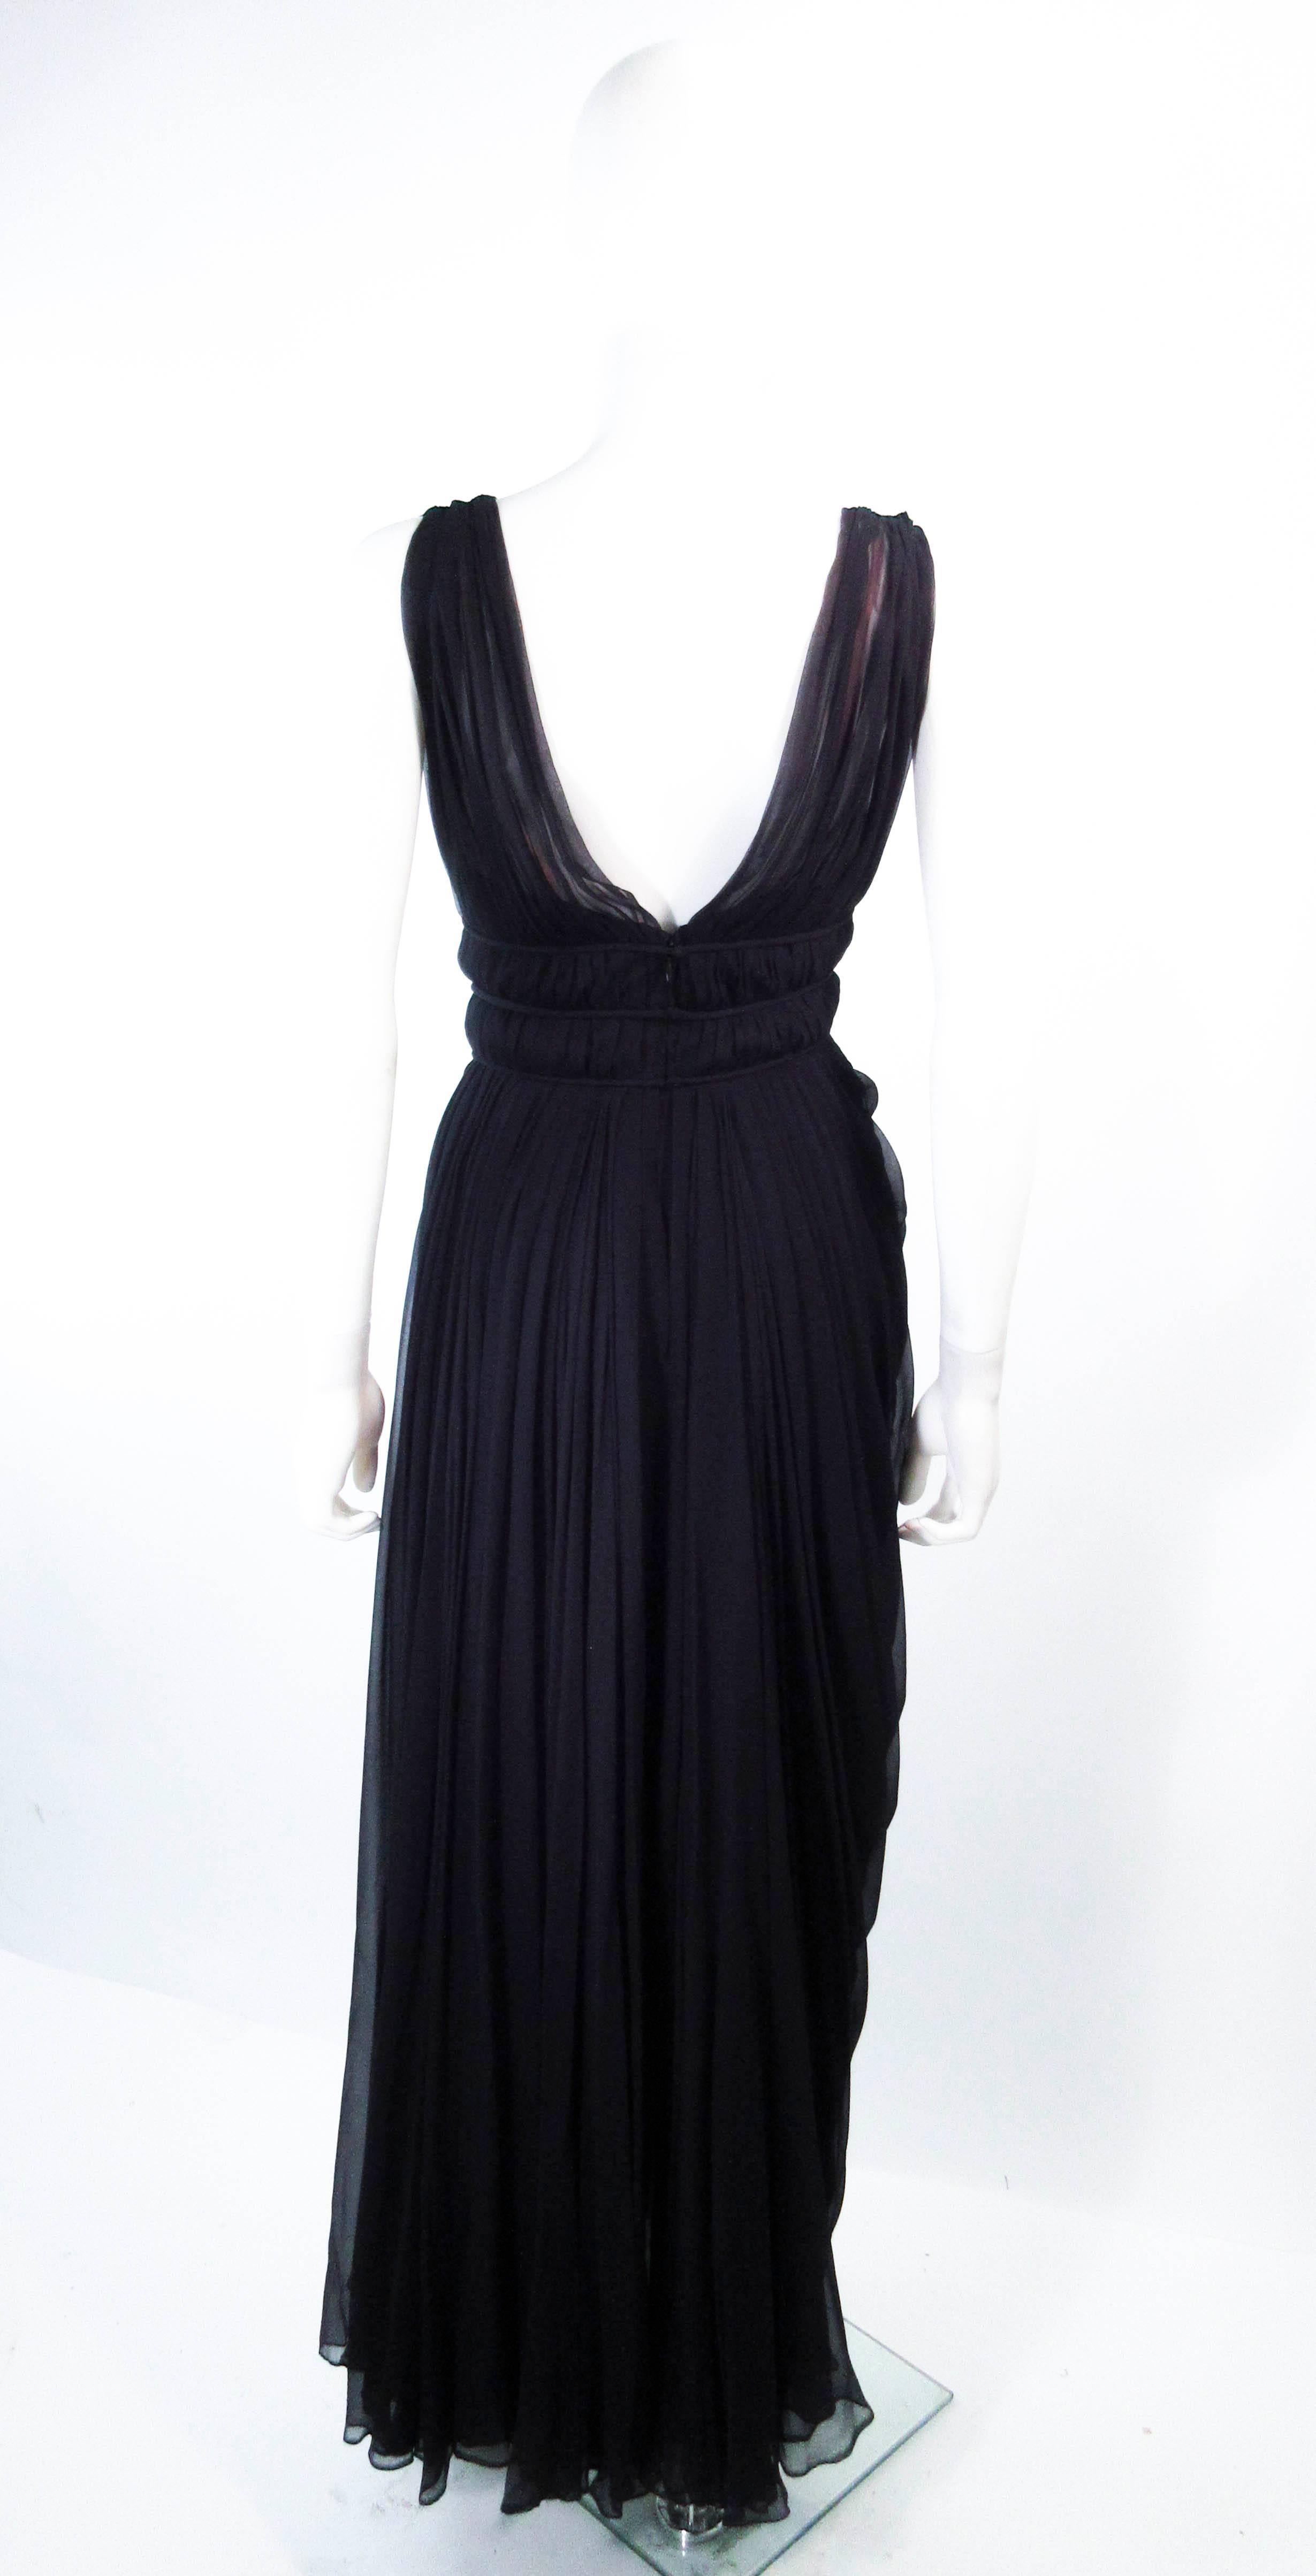 HELEN ROSE Black Silk Chiffon Draped Gown with Empire Waist Size 2 4 For Sale 2